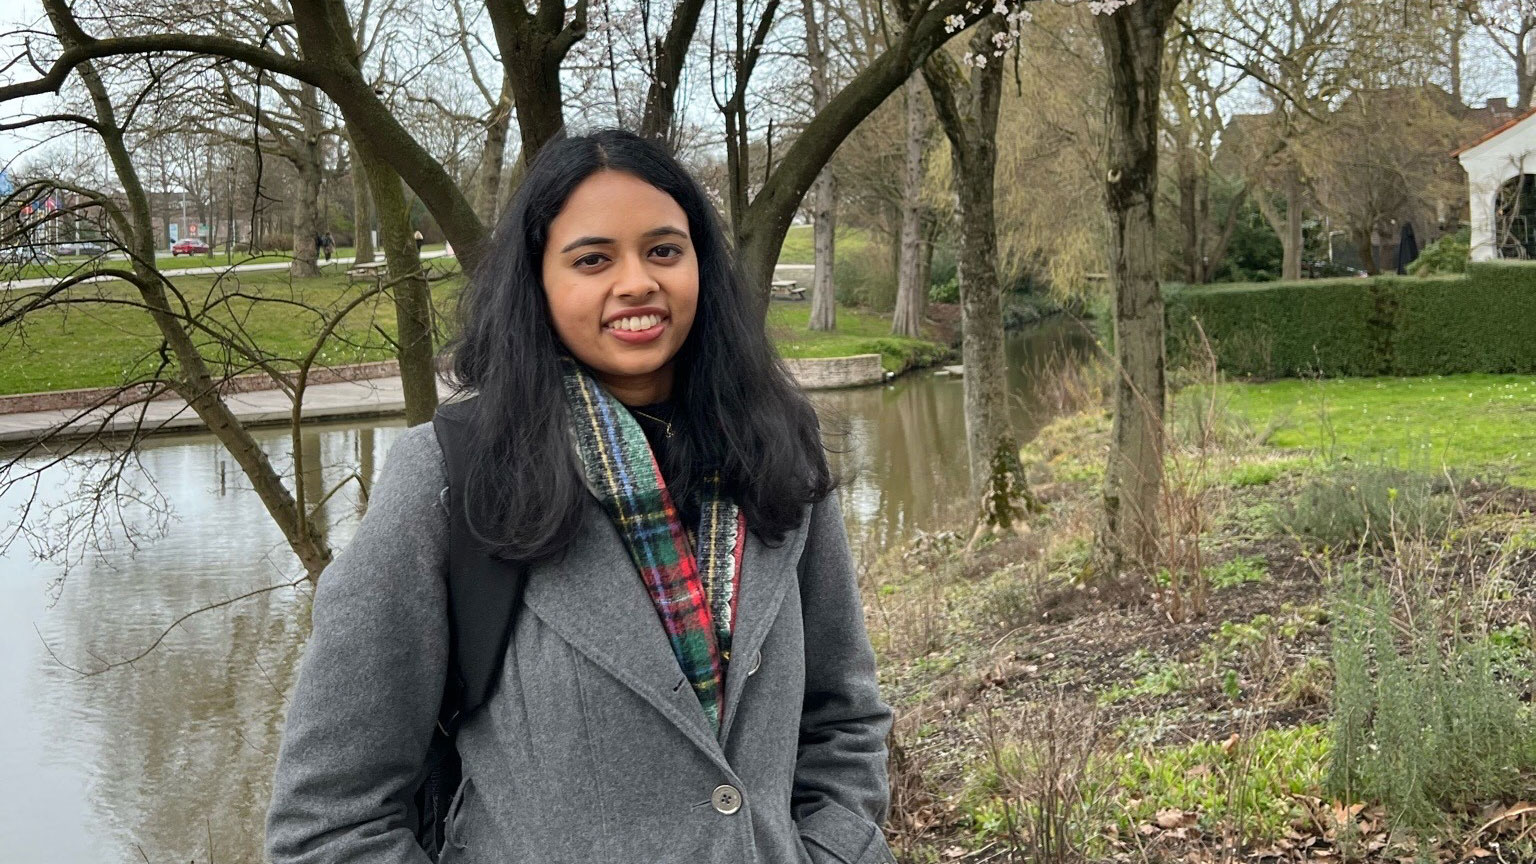 Anusha Natarajan is photographed standing in front of a tree wearing a warm jacket.